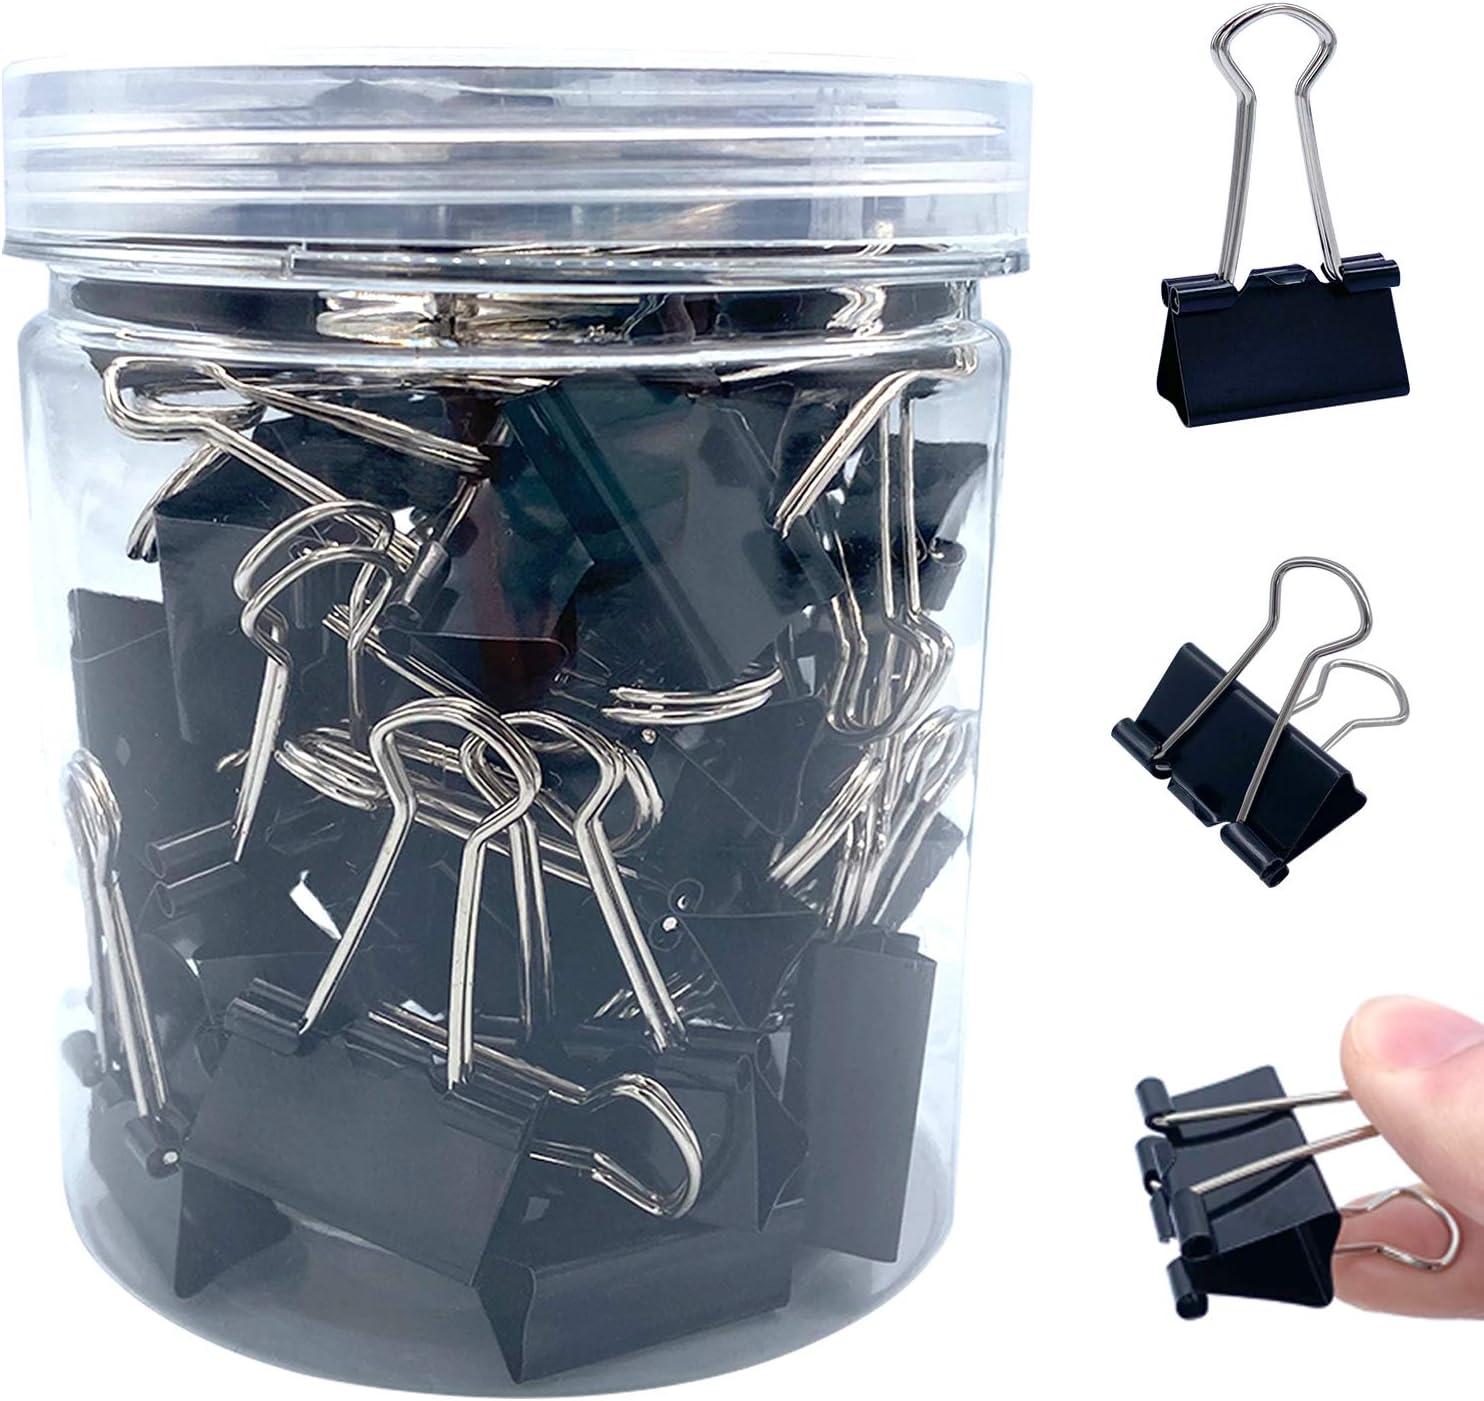 motdwkyd 50pcs black binder clips paper binder clips medium size metal fold back clips with box for office